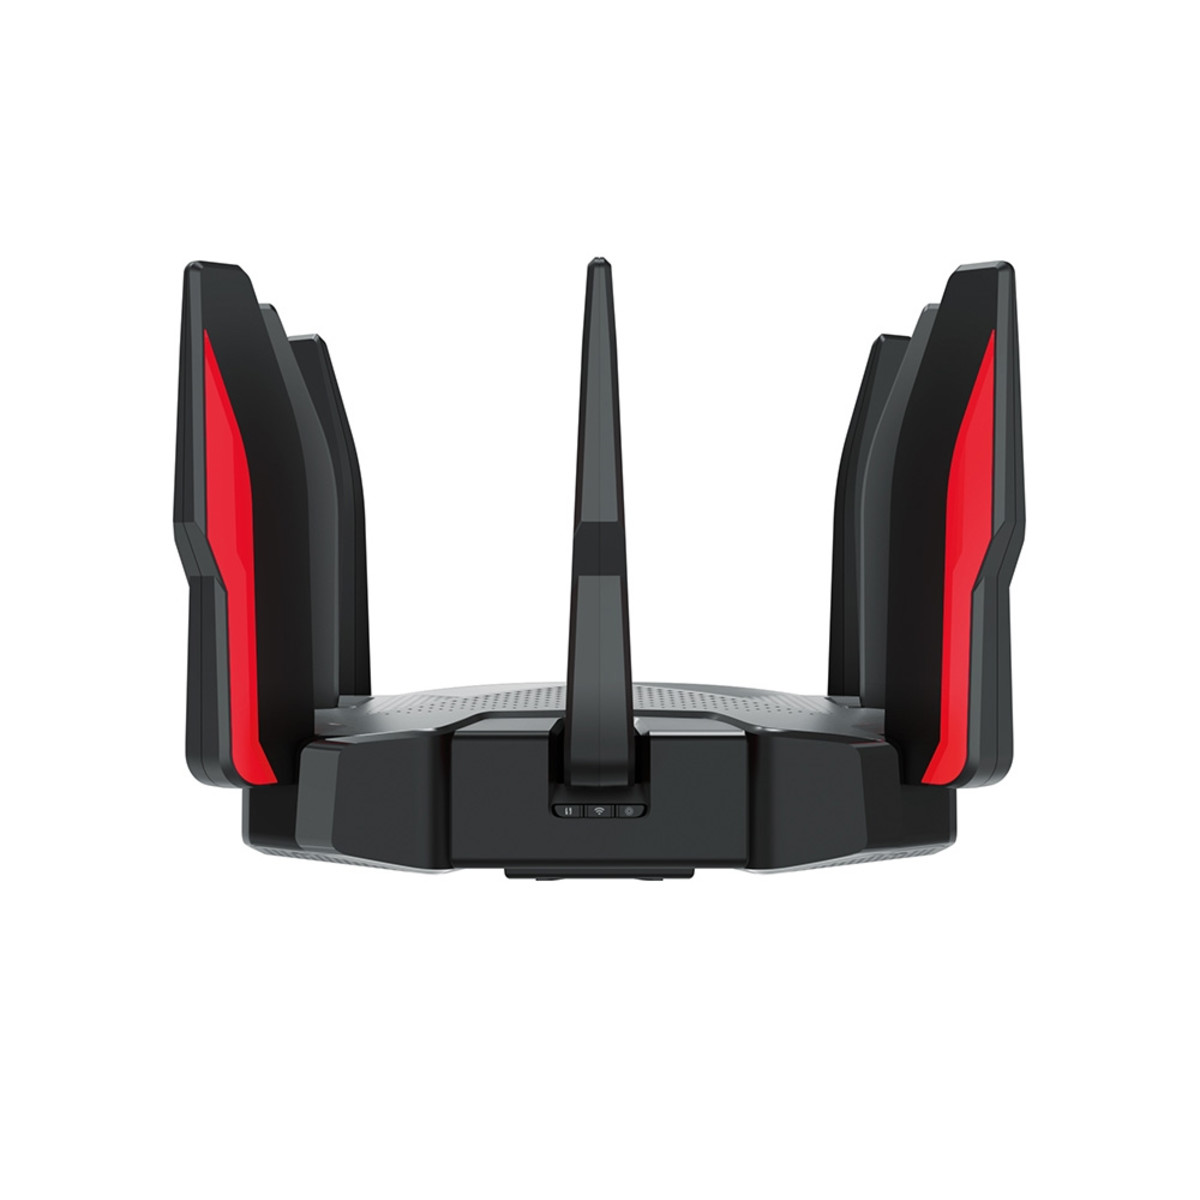 AX6600 Tri-Band Wi-Fi 6 Gaming Router